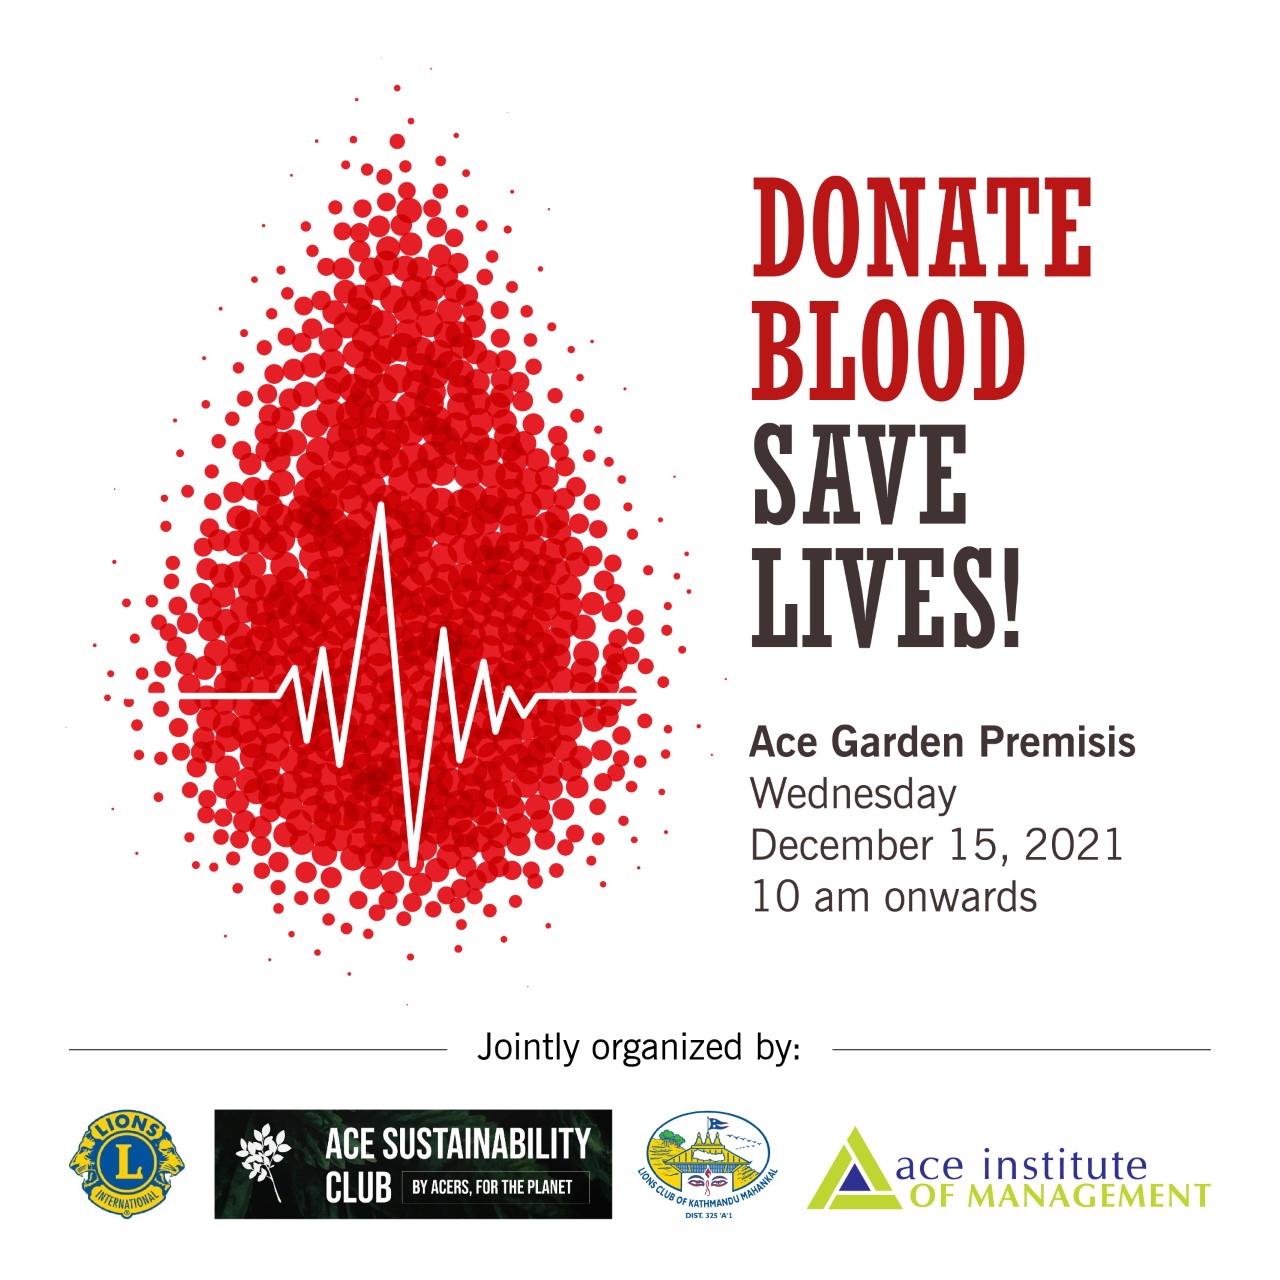 Blood donation program at Ace, for a cause